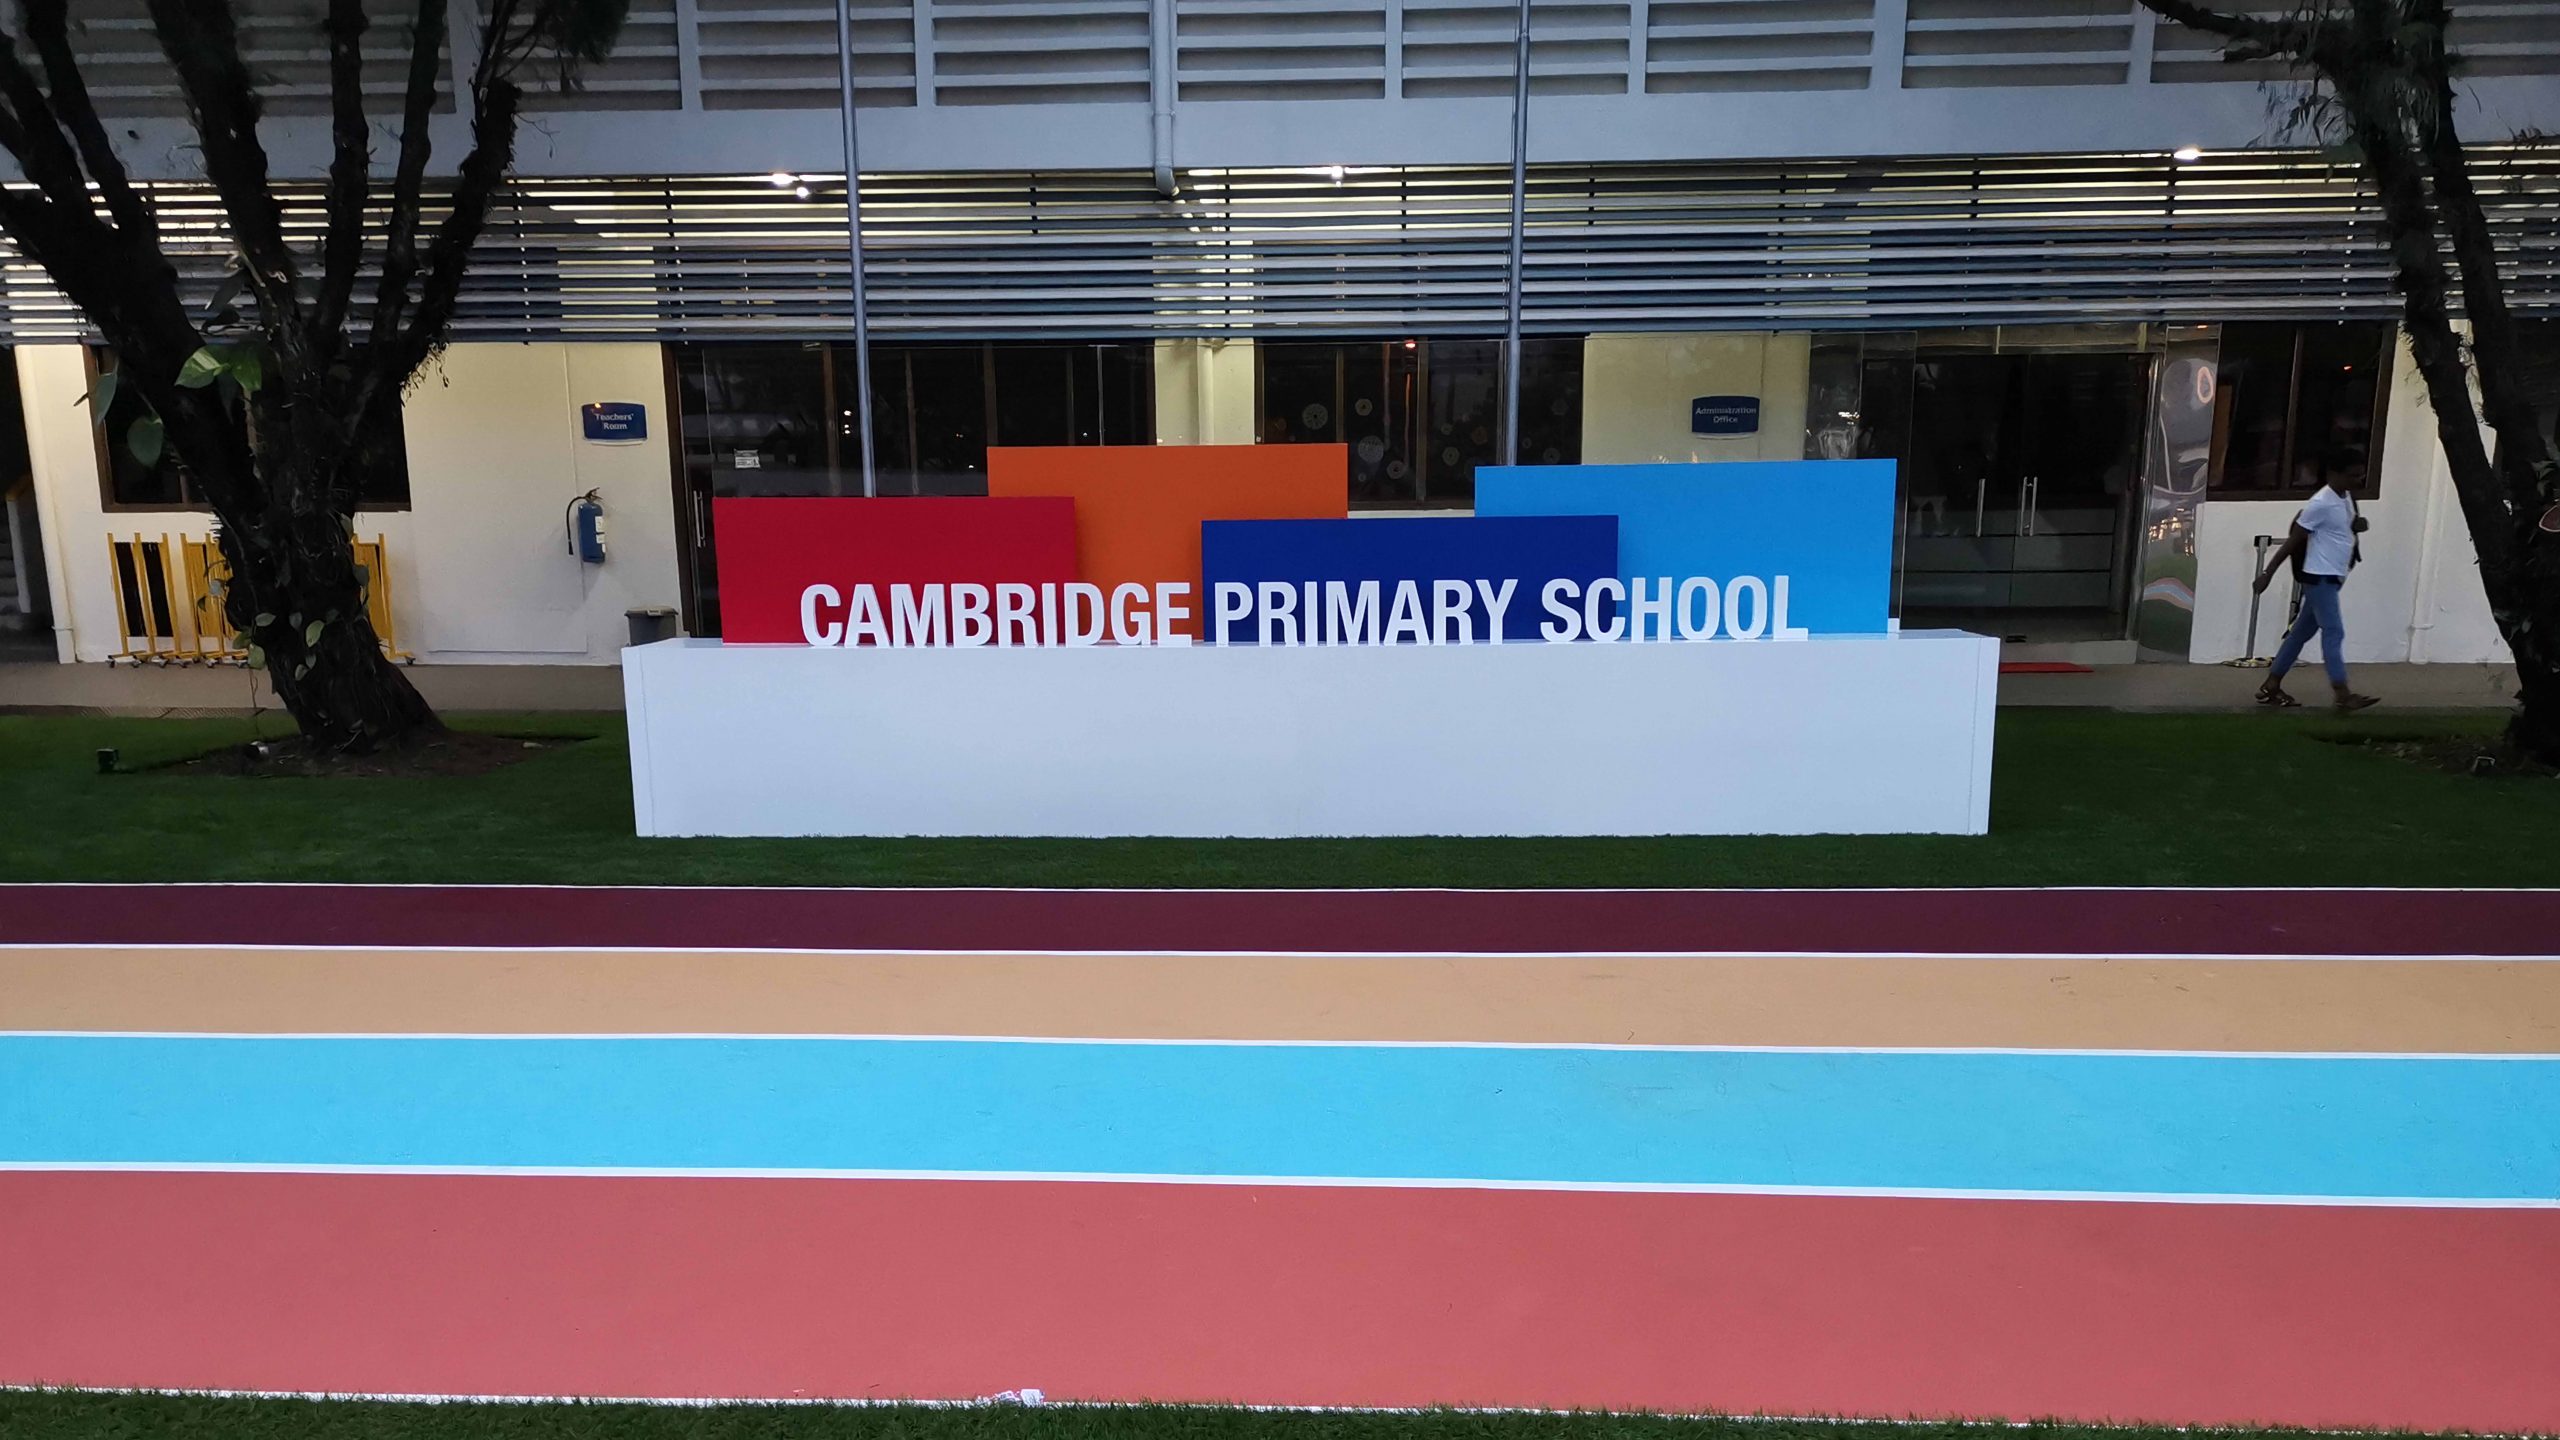 DIMENSIONS International College Bukit Timah Campus – School Signage and Running Tracks